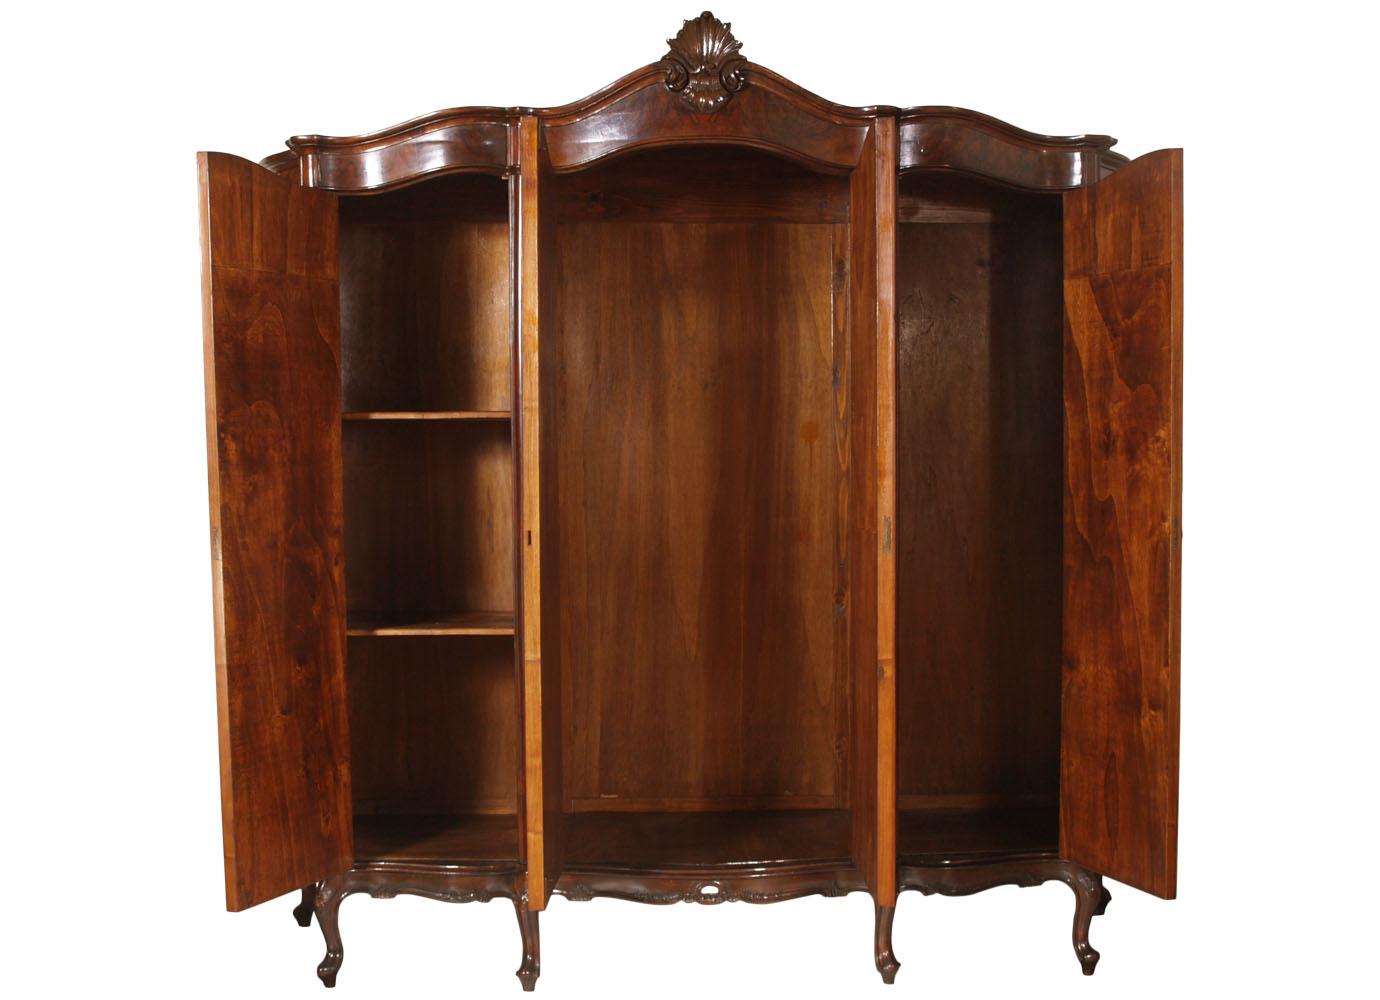 Venetian Baroque exceptional wardrobe, in hand-carved walnut and burl walnut fillet inlay of the period 1920s, Testolini & Salviati attributed; only we just polished it with wax.
Measure cm: H 230 L225 P70


